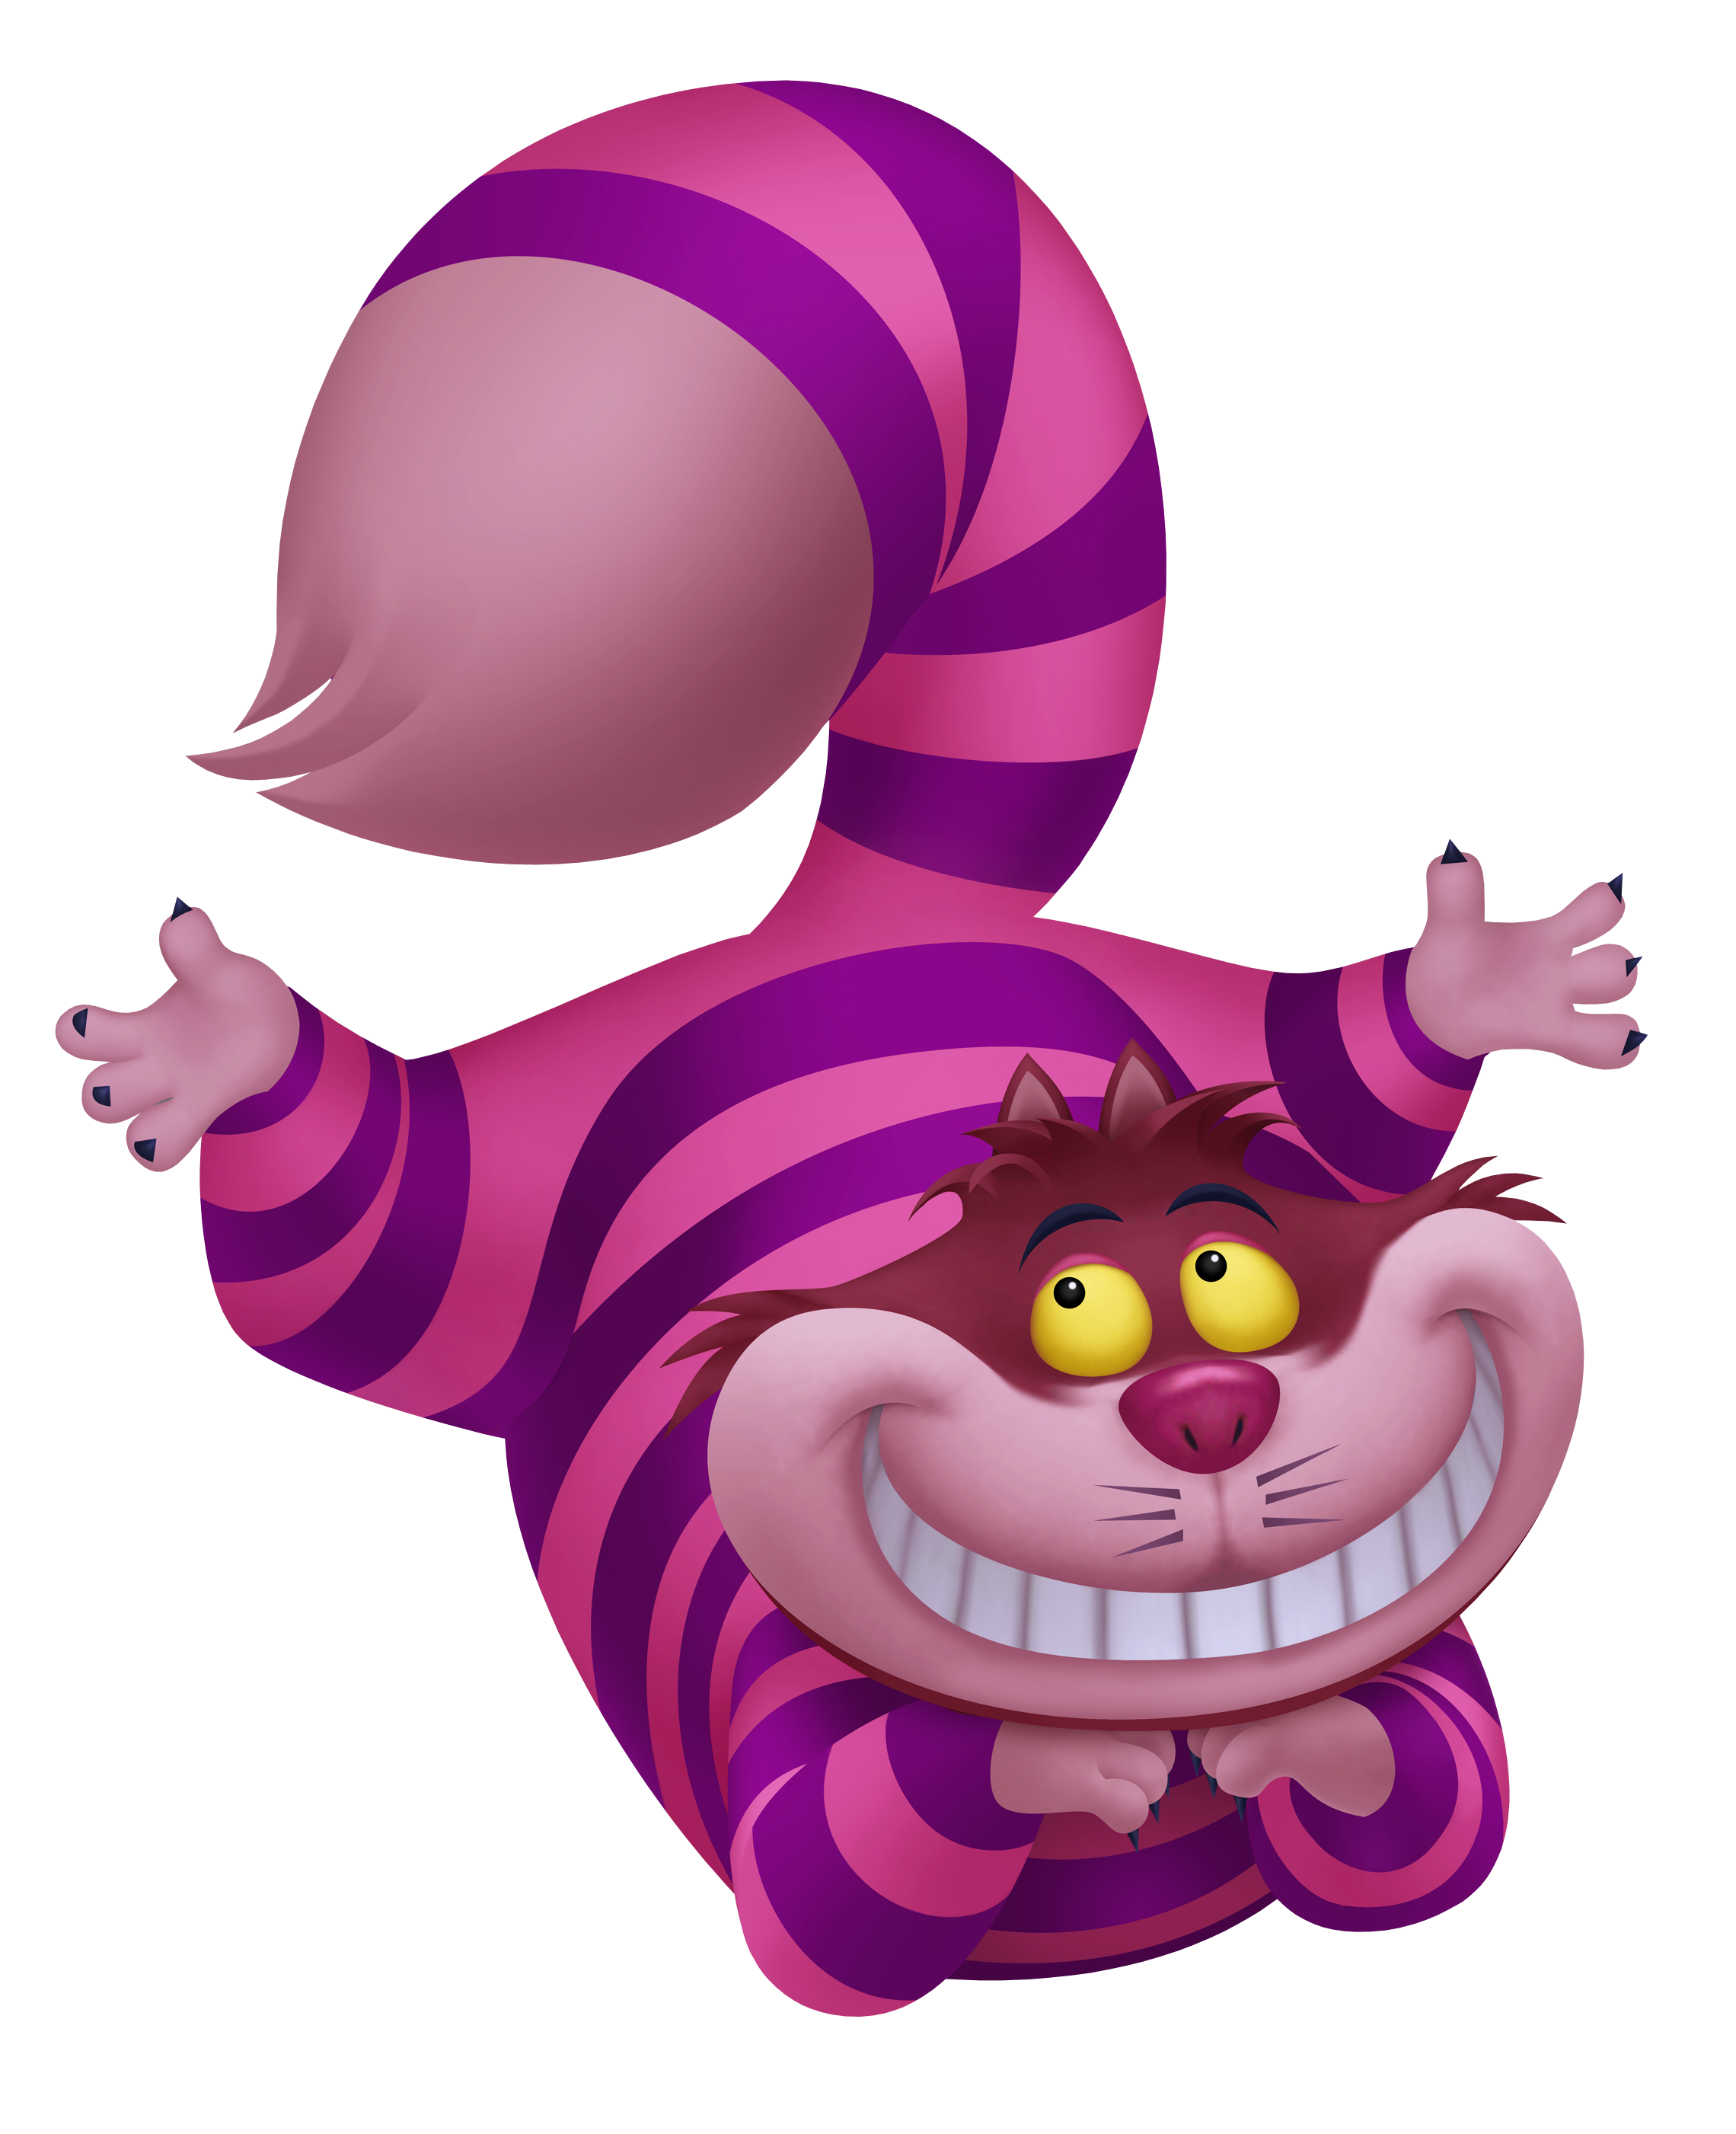 http://img1.wikia.nocookie.net/__cb20110816105656/disney/images/e/e1/Cheshire_Cat_KHREC.png